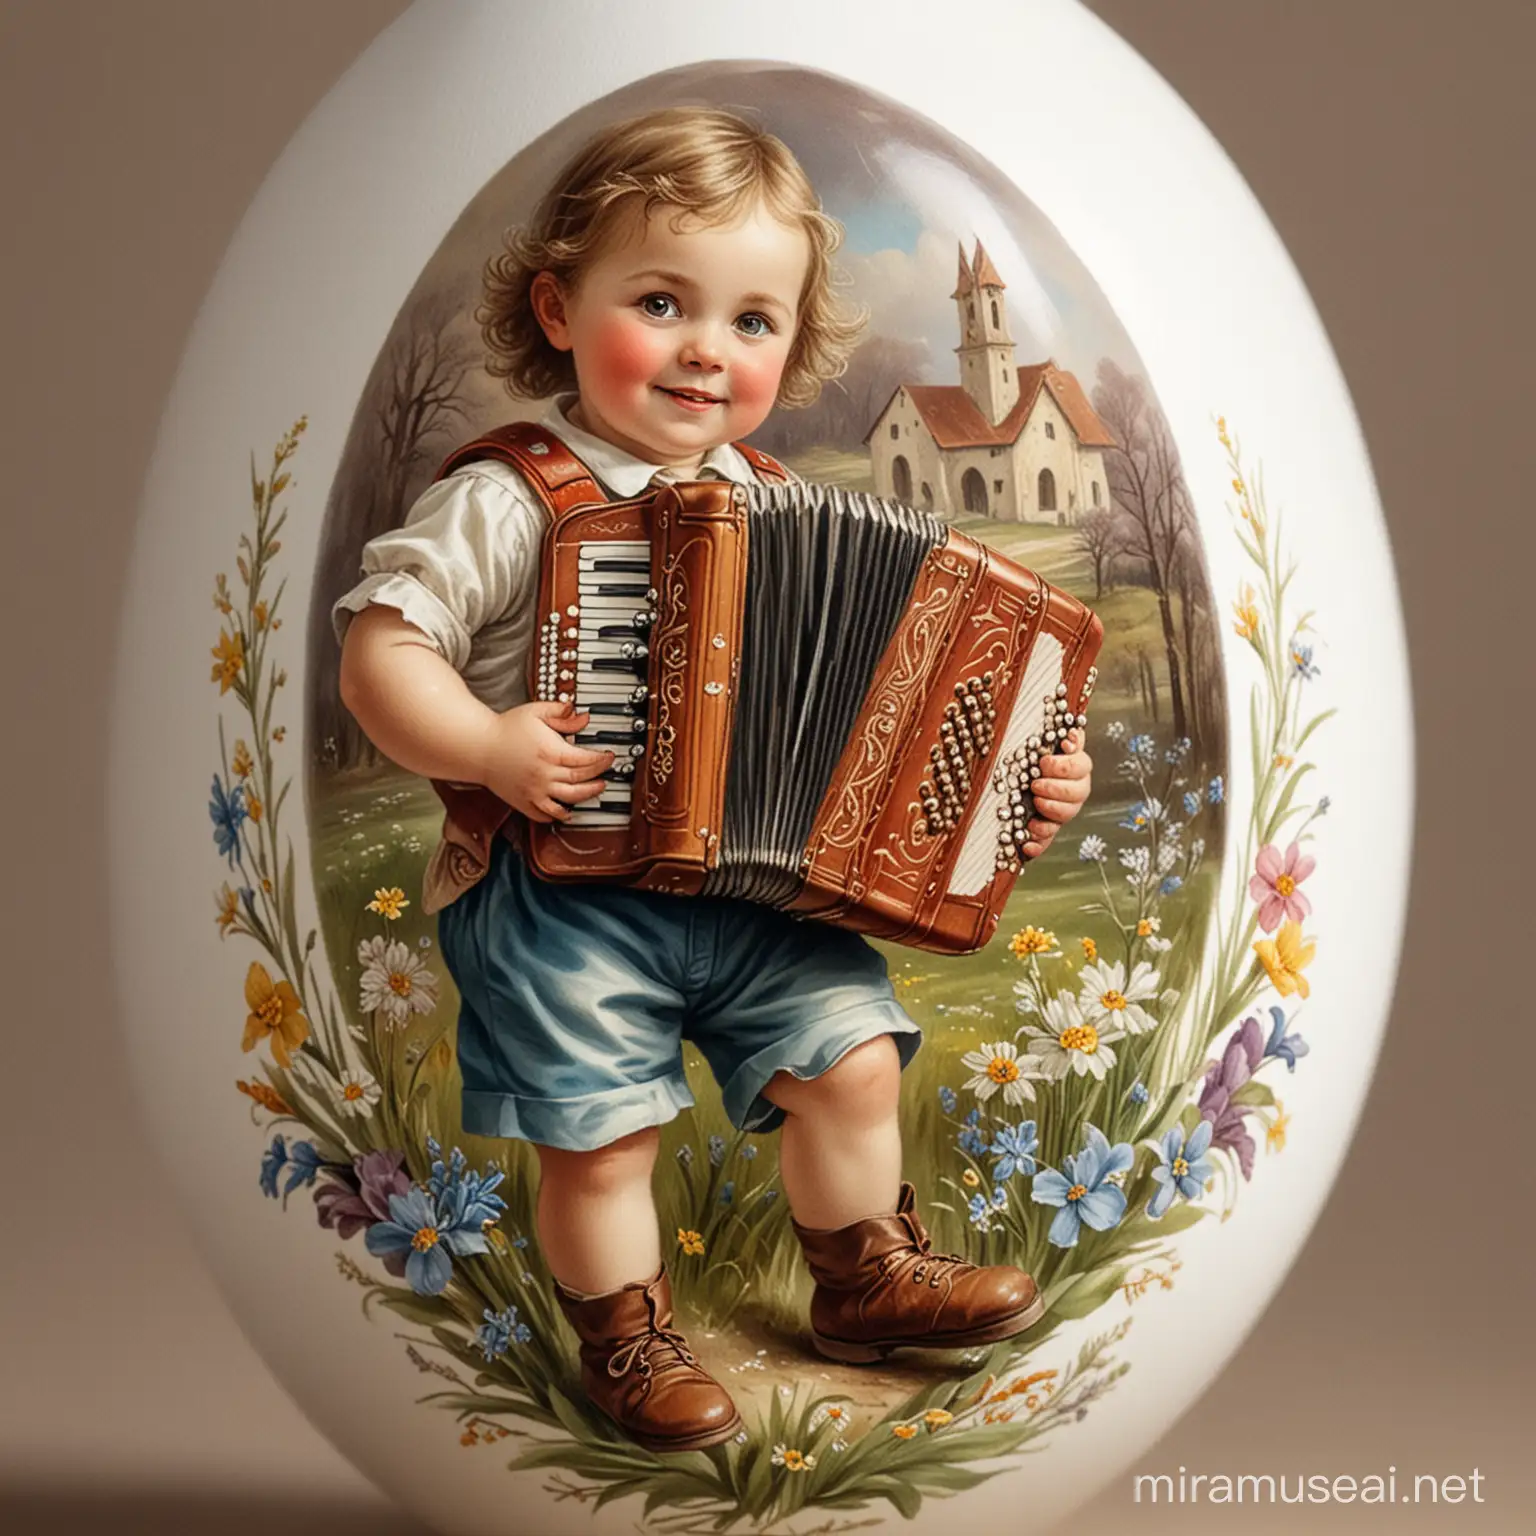 Child Playing Accordion on Decorated Easter Egg